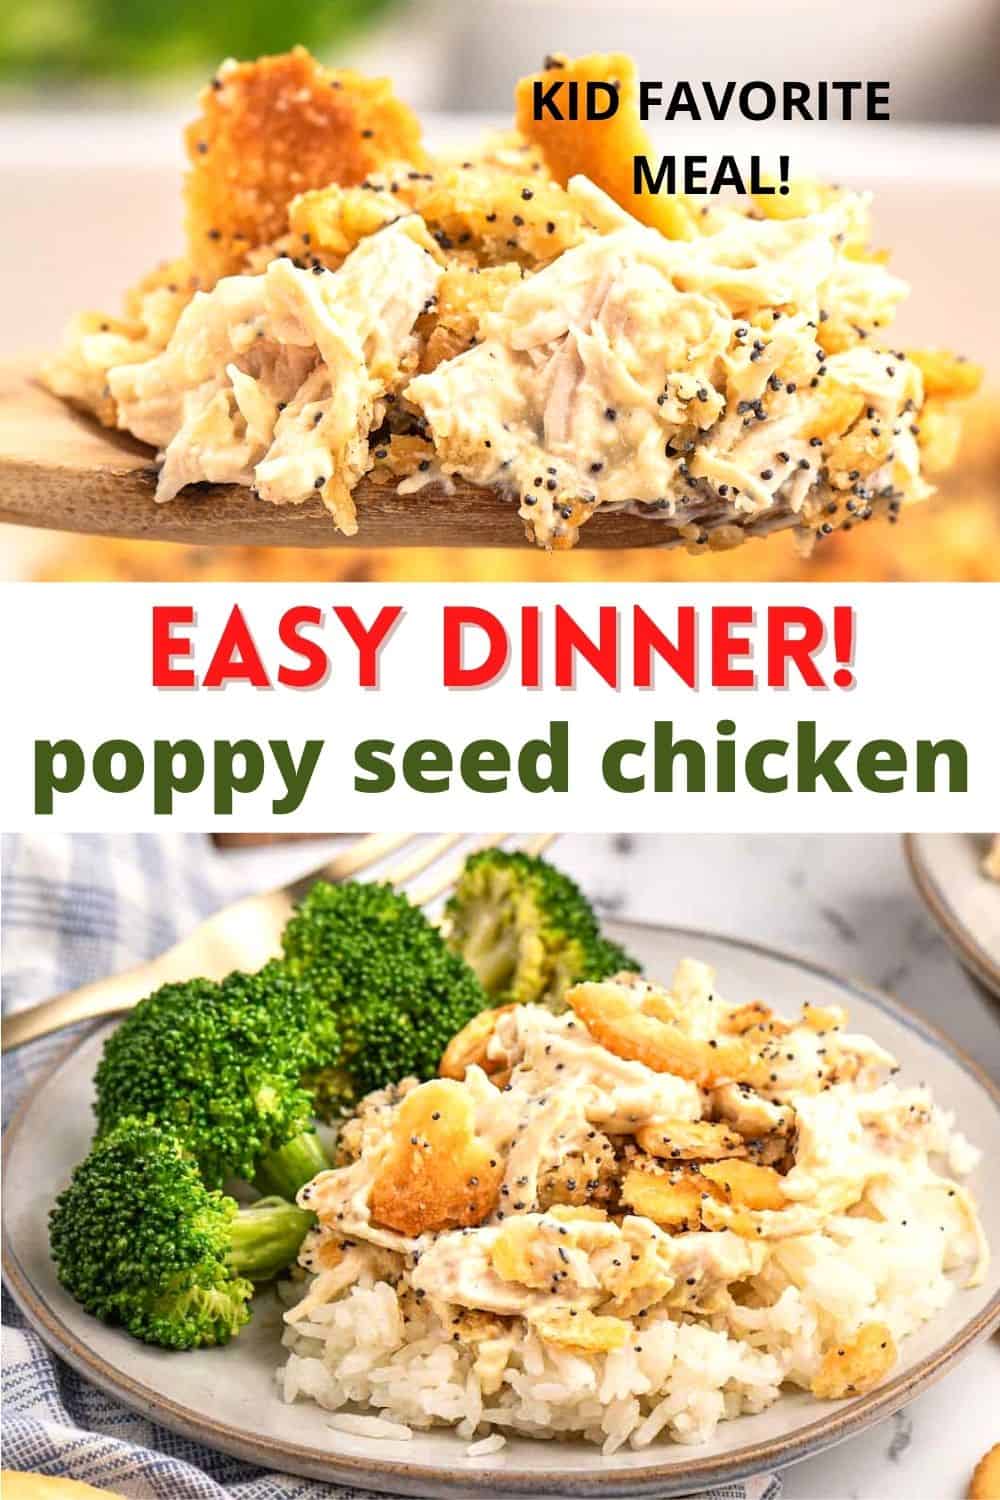 Poppy seed chicken is a favorite creamy casserole topped with buttery Ritz crackers. We serve our chicken poppy seed casserole over white rice. Made with few ingredients, this recipe is an easy family dinner!